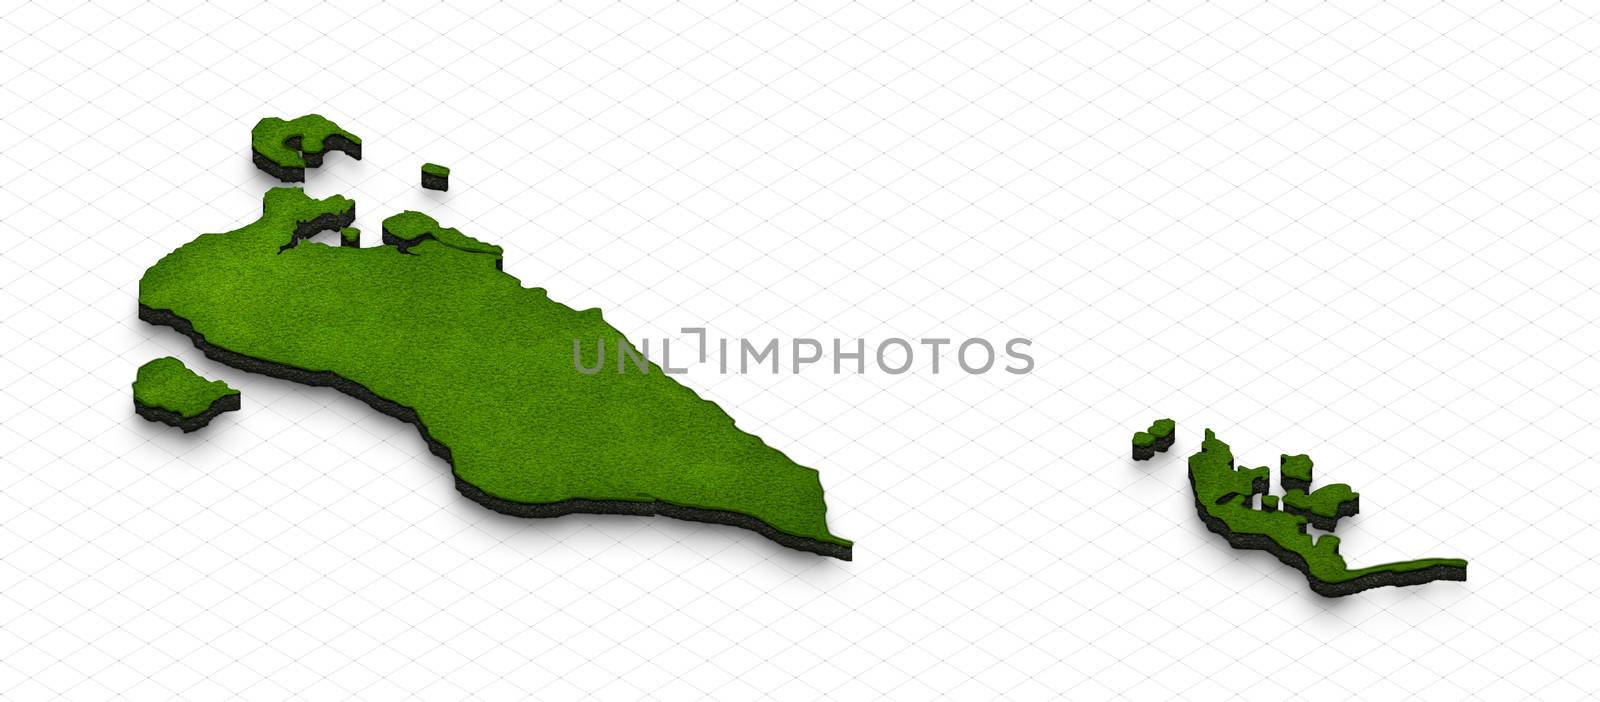 Map of Bahrain. 3D isometric perspective illustration. by sanches812